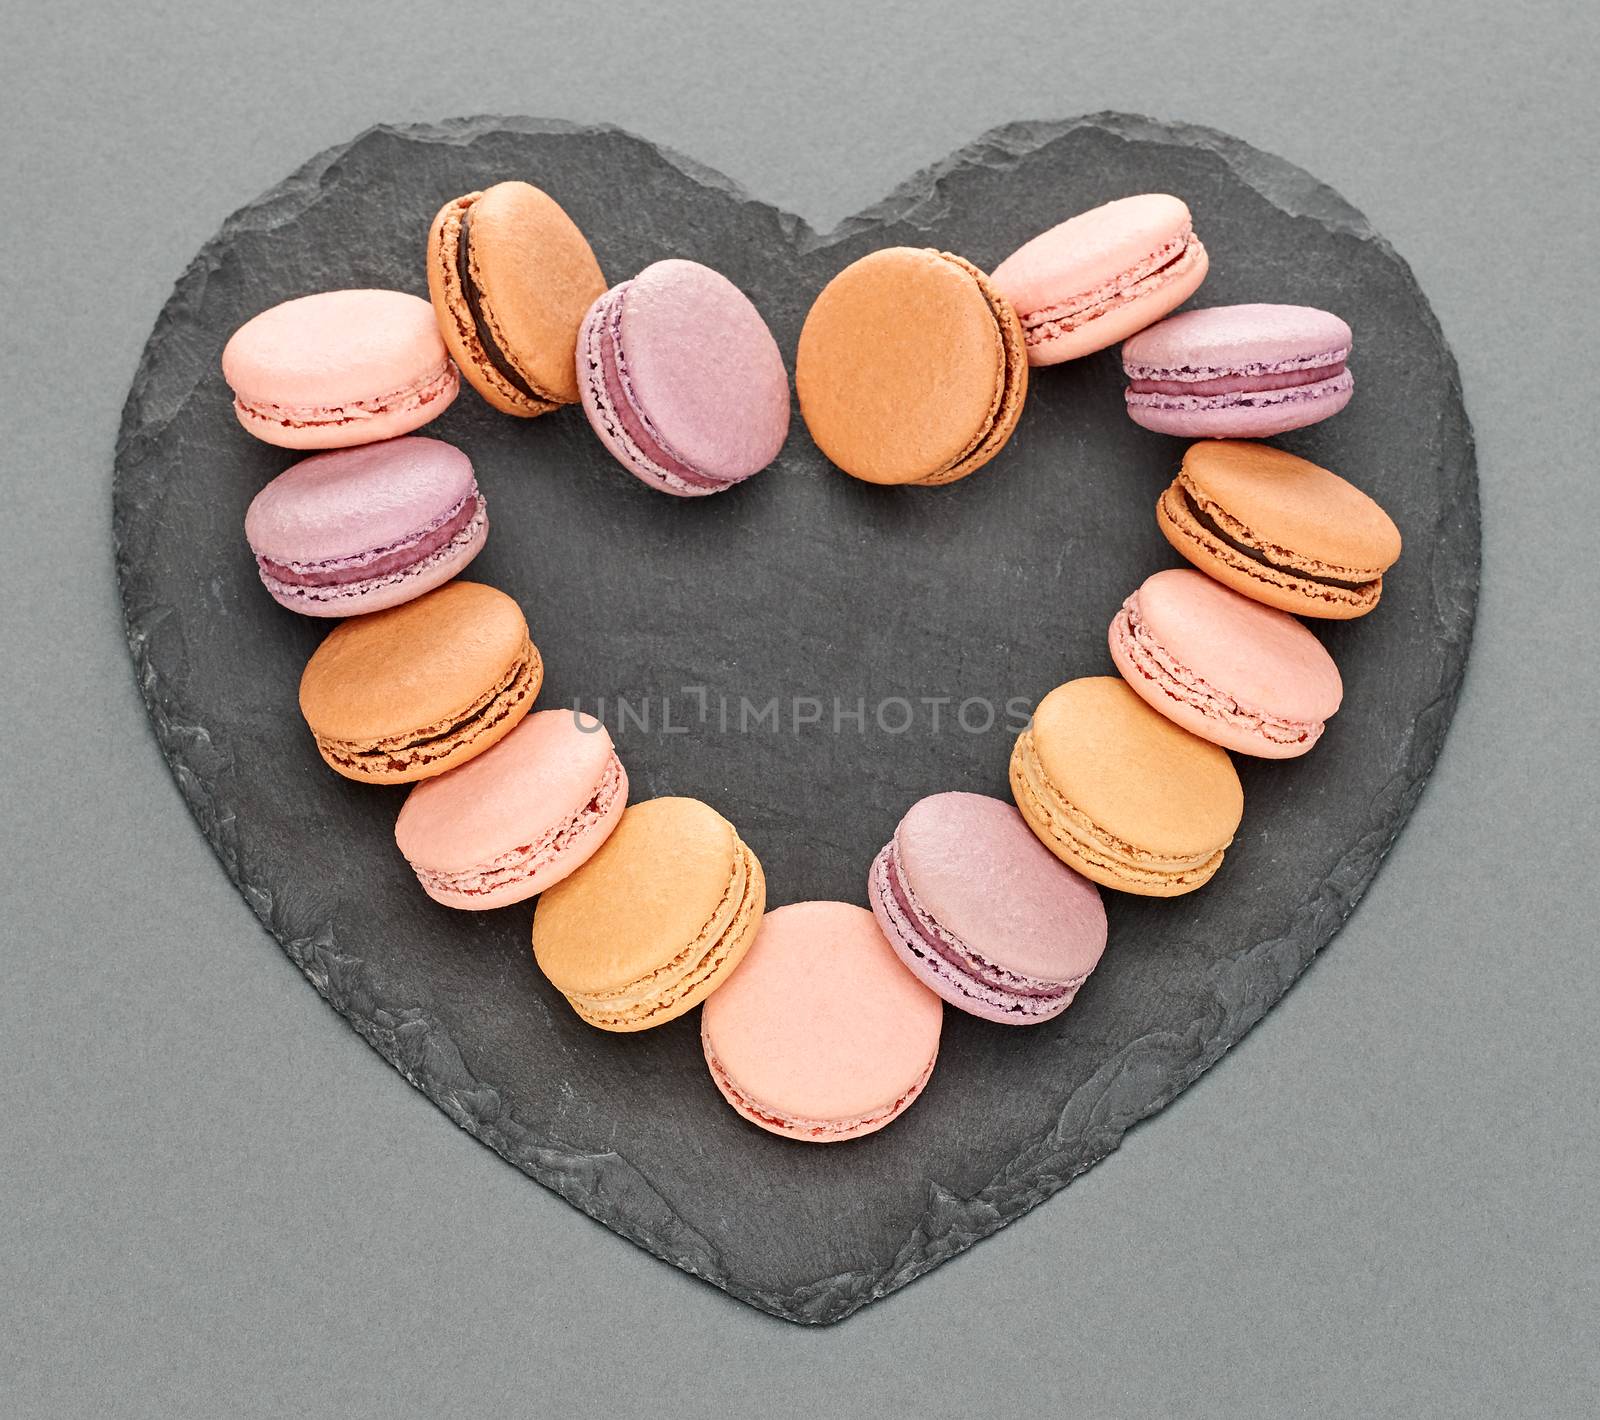 Still life, macarons sweet colorful, heart shape, black placemat. French traditional delicious dessert. Unusual creative romantic, gray background. Concept for love story.Valentines Day